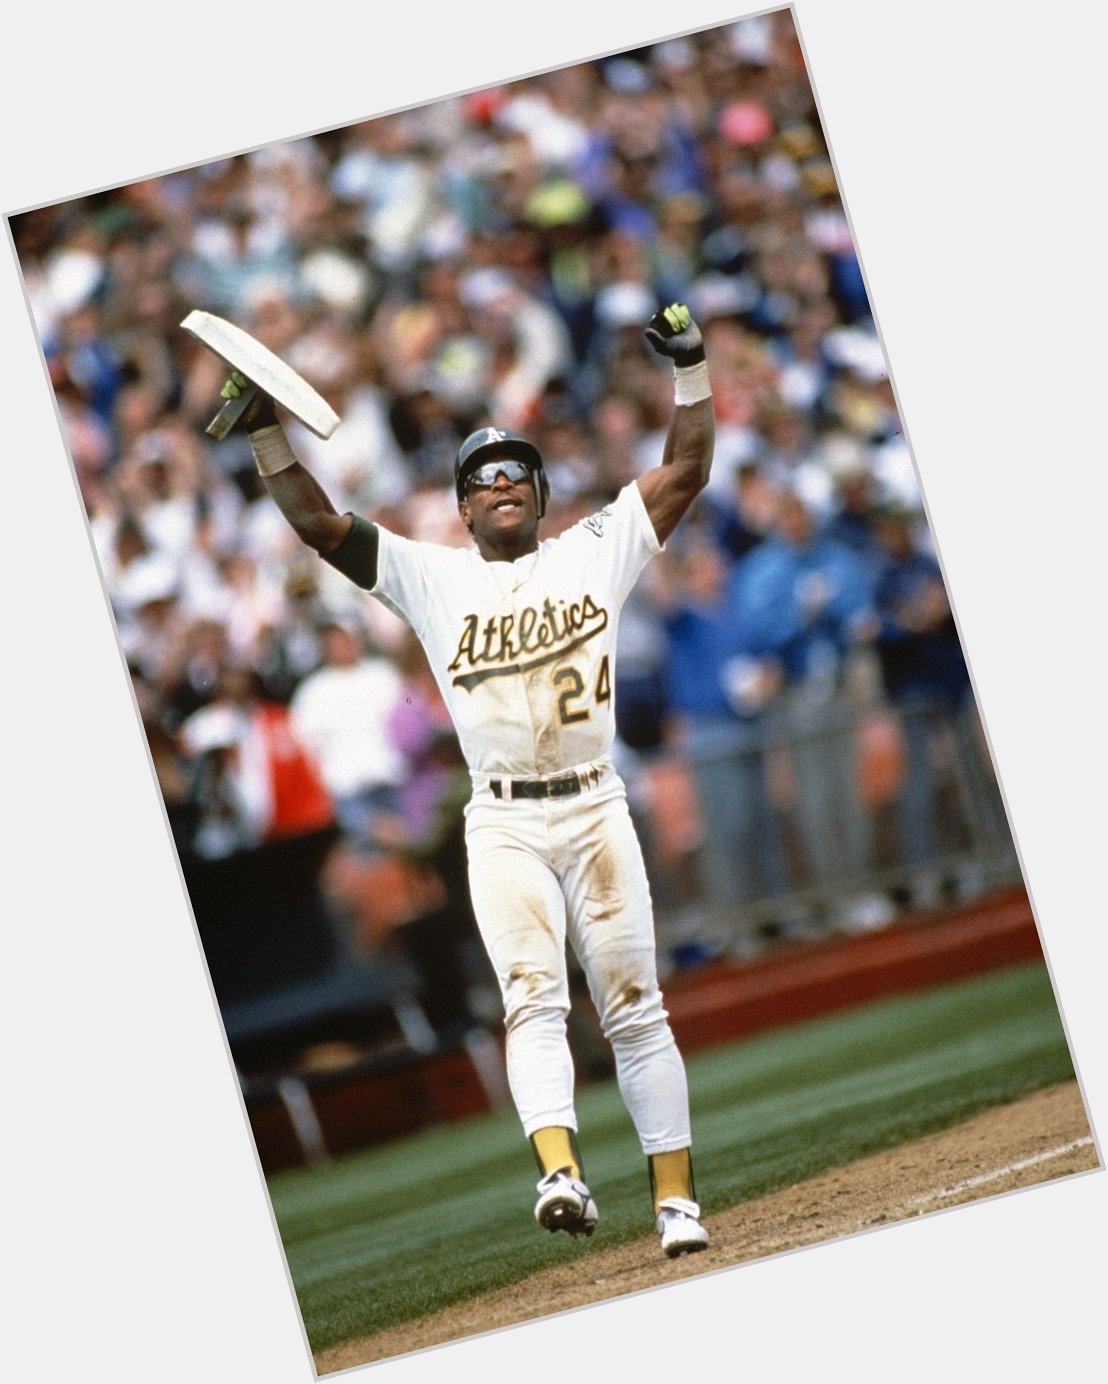 A star was surely born on Christmas Day 62 years ago. Happy birthday to Rickey Henderson! 